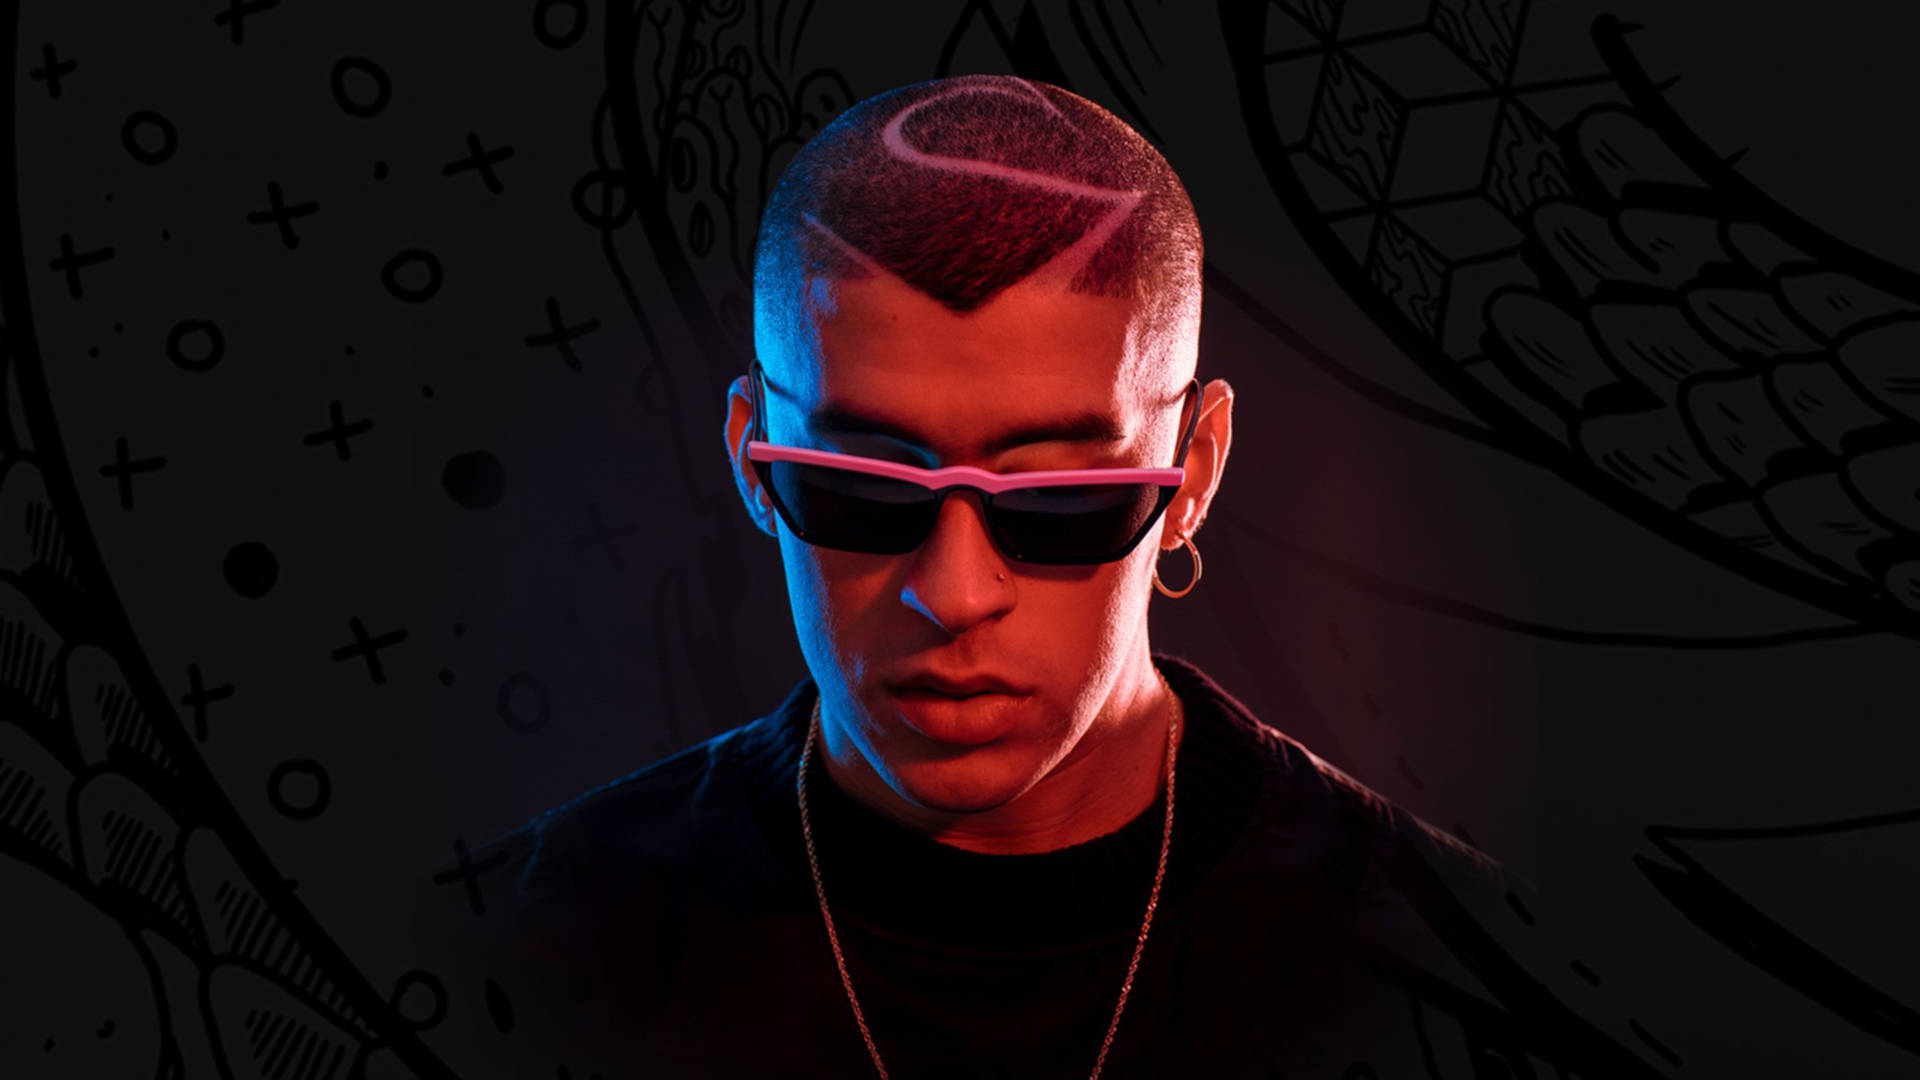 1920X1080 Bad Bunny Wallpaper and Background